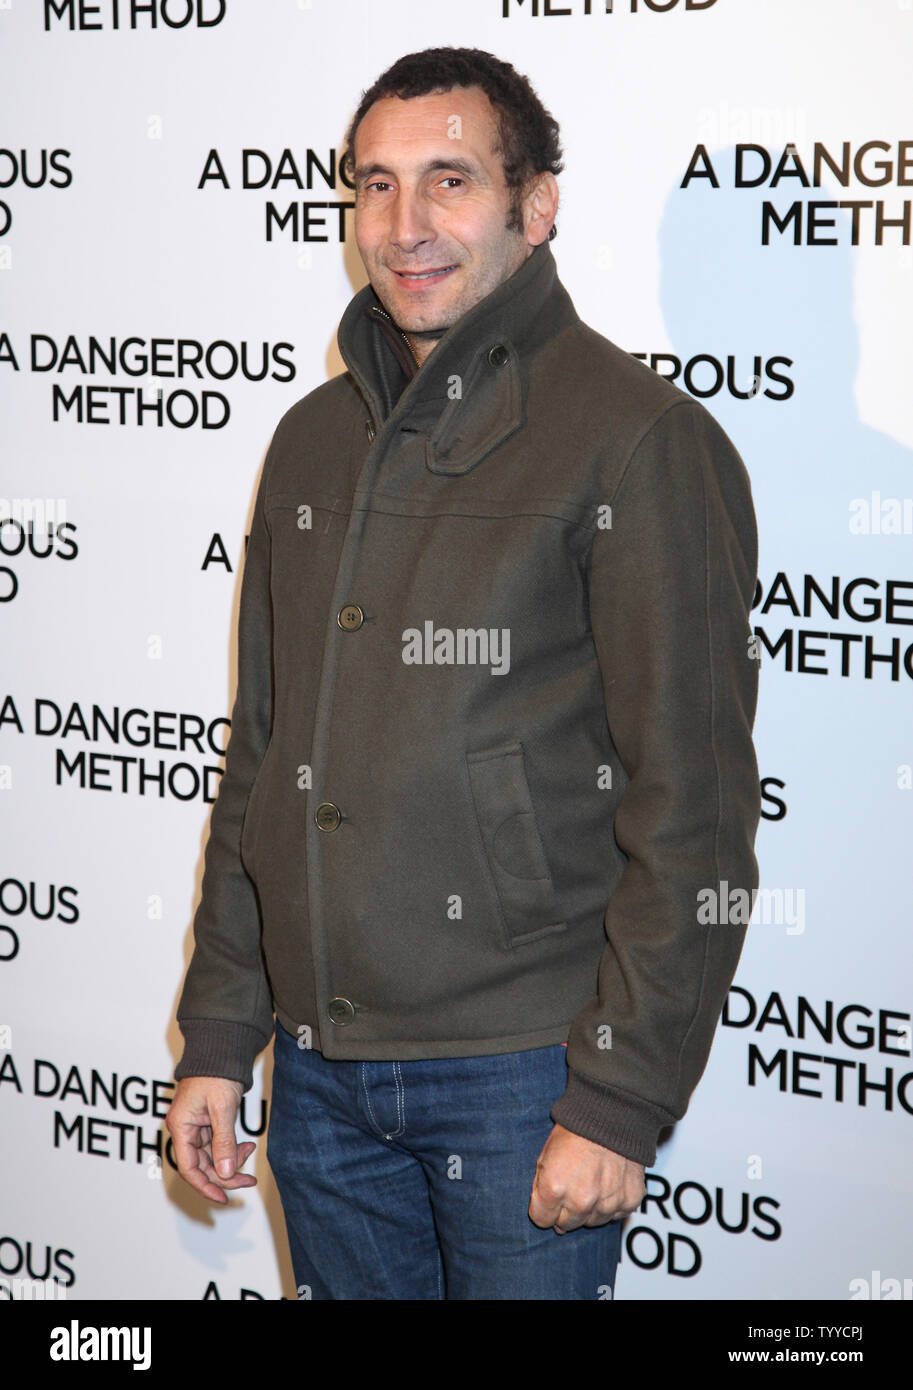 Zinedine Soualem arrives for the French premiere of the film 'A Dangerous Method' in Paris on December 12, 2011.     UPI/David Silpa. Stock Photo